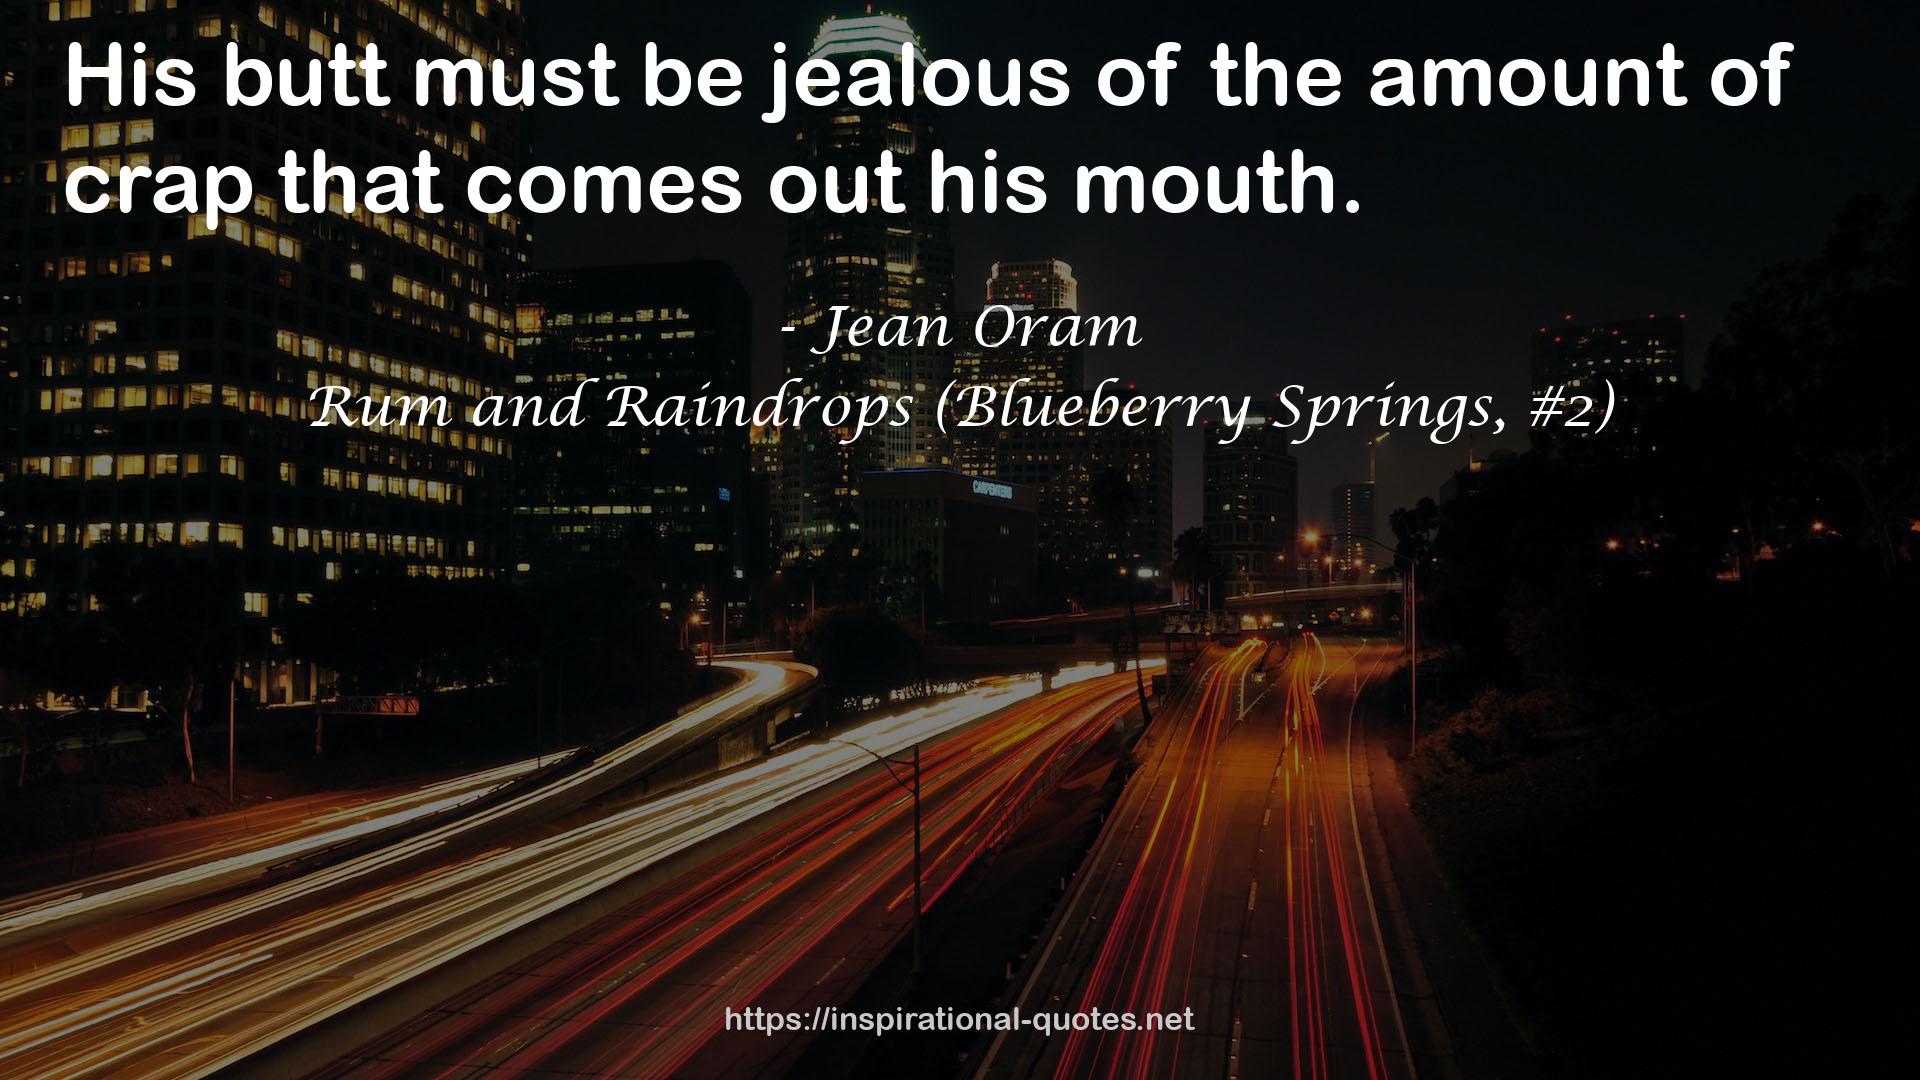 Rum and Raindrops (Blueberry Springs, #2) QUOTES